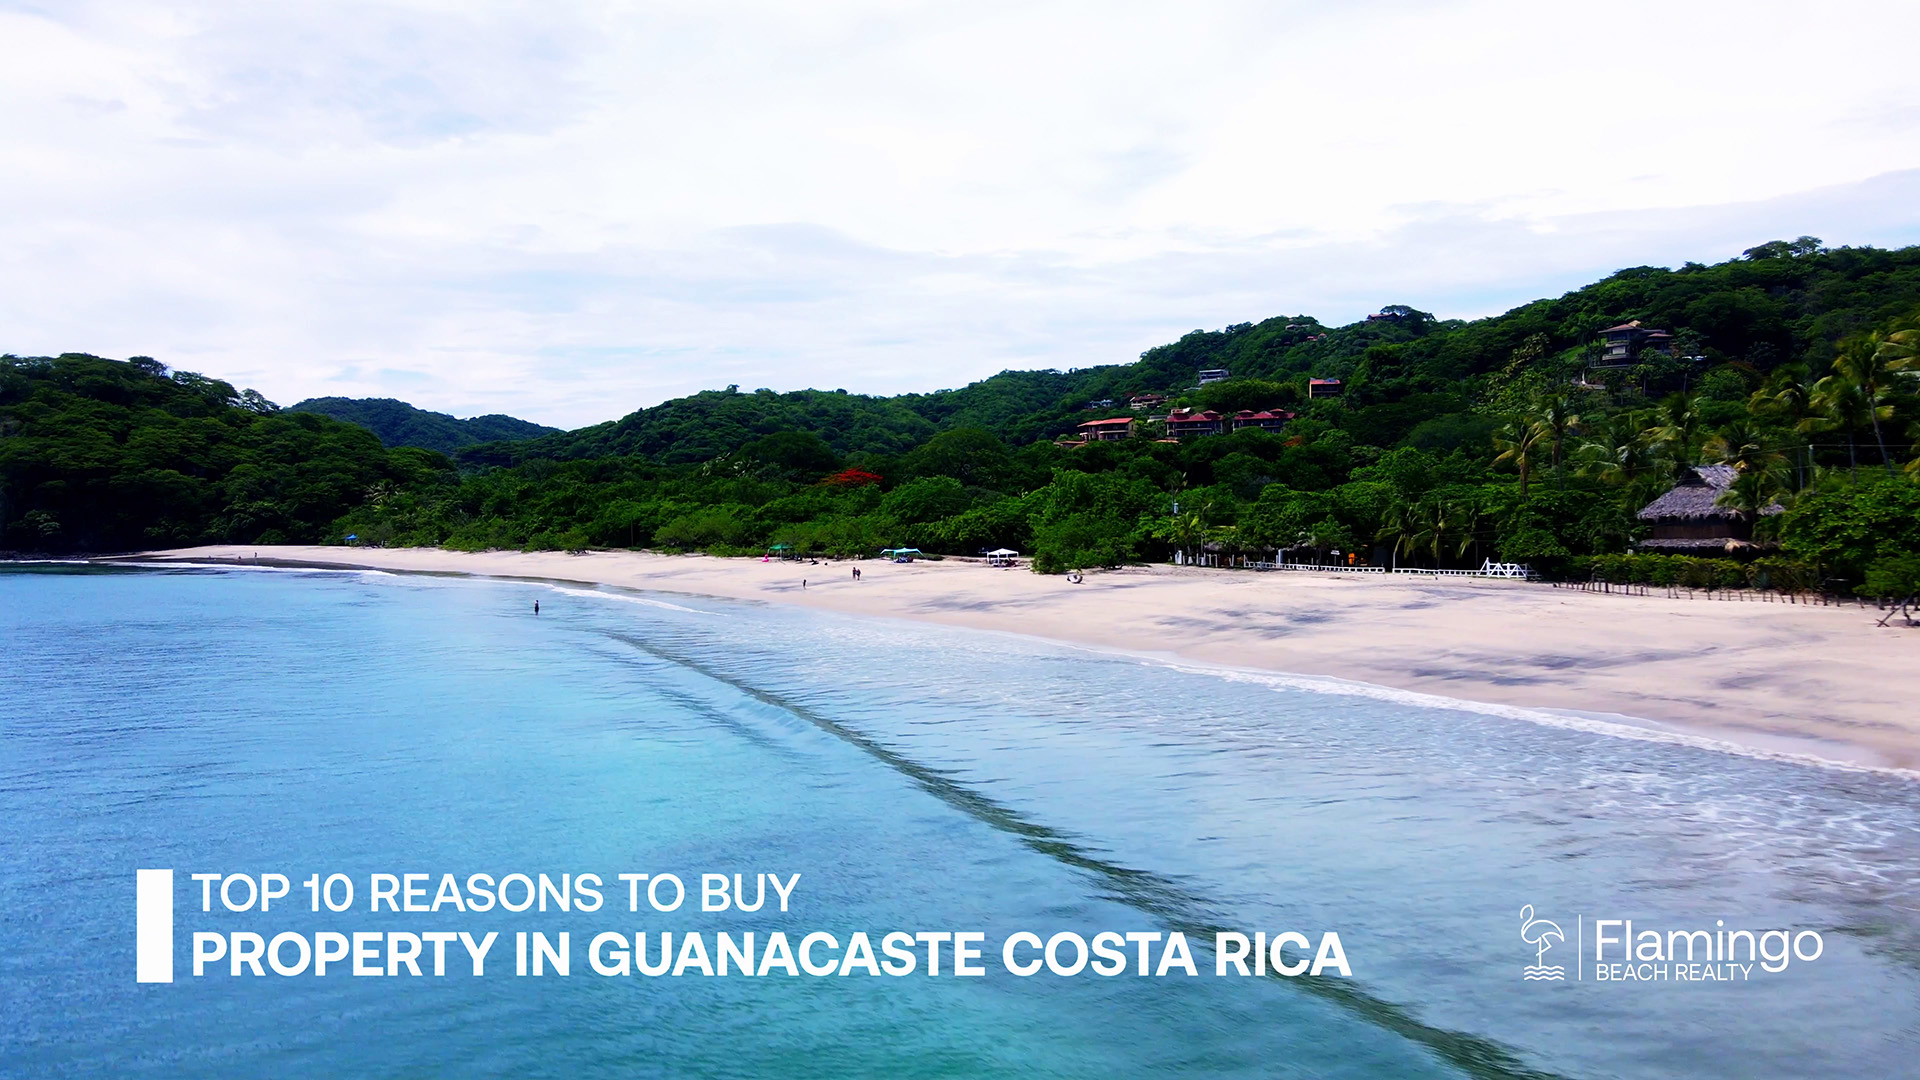 Top 10 Reasons to Buy Property in Guanacaste, Costa Rica